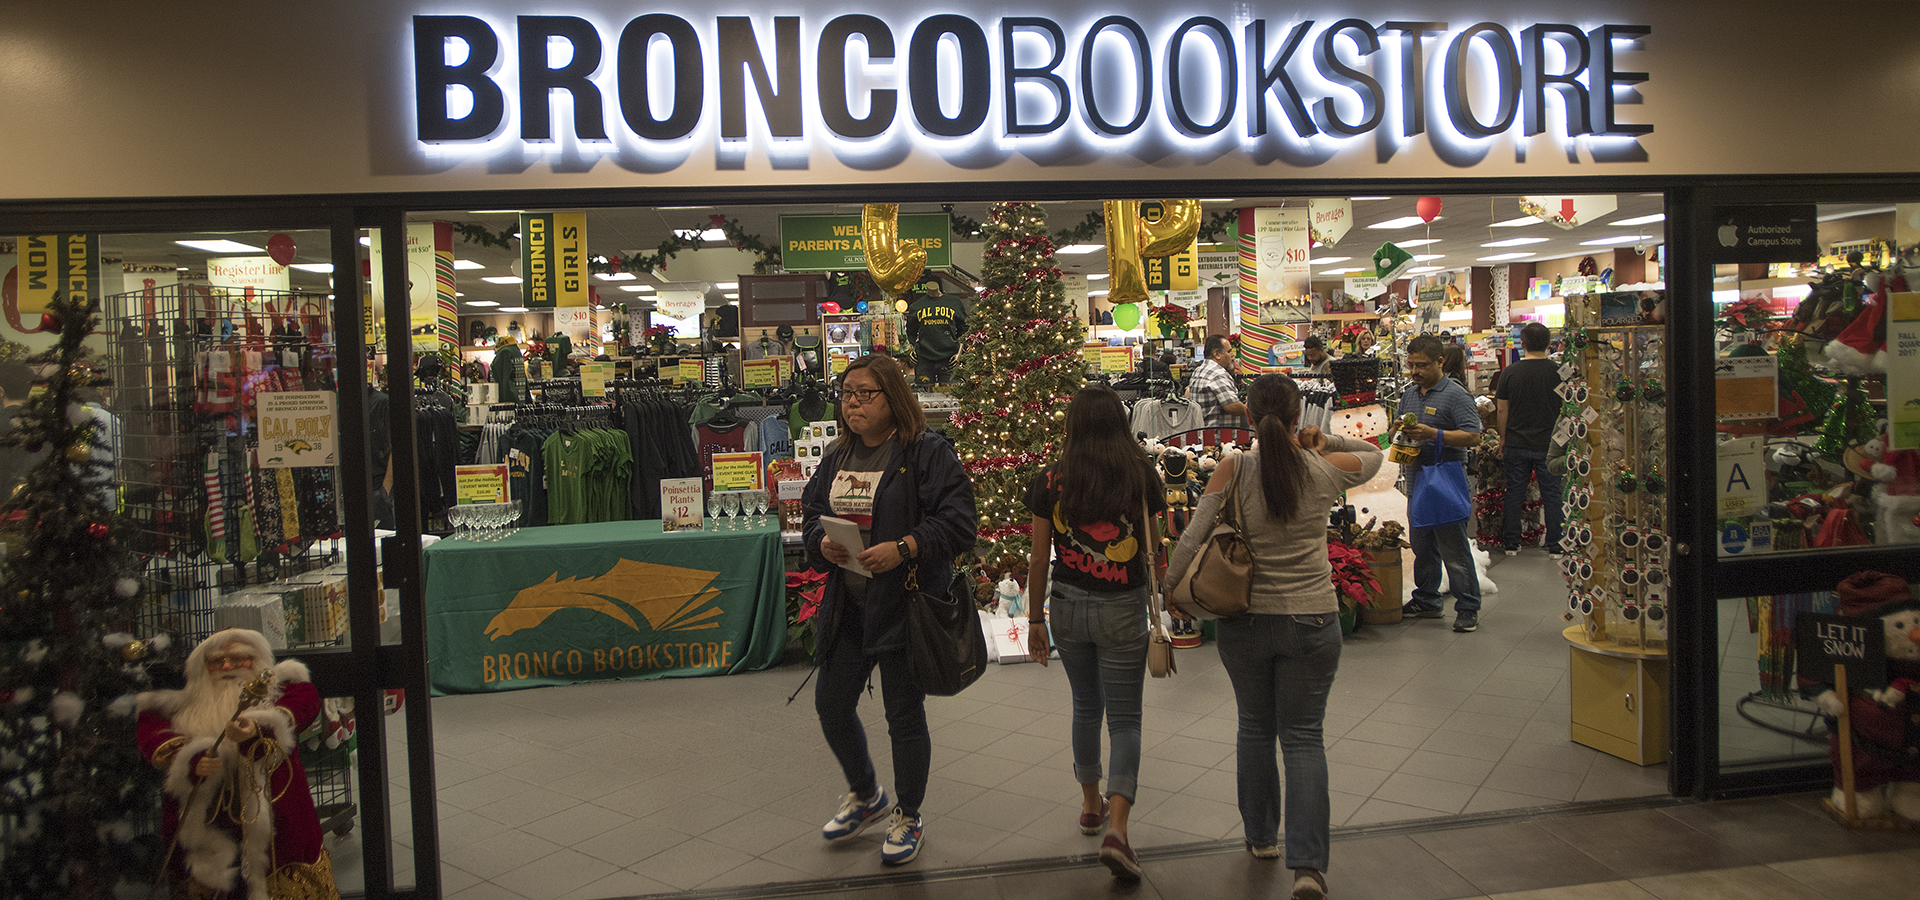 Bronco Bookstore during the holidays.